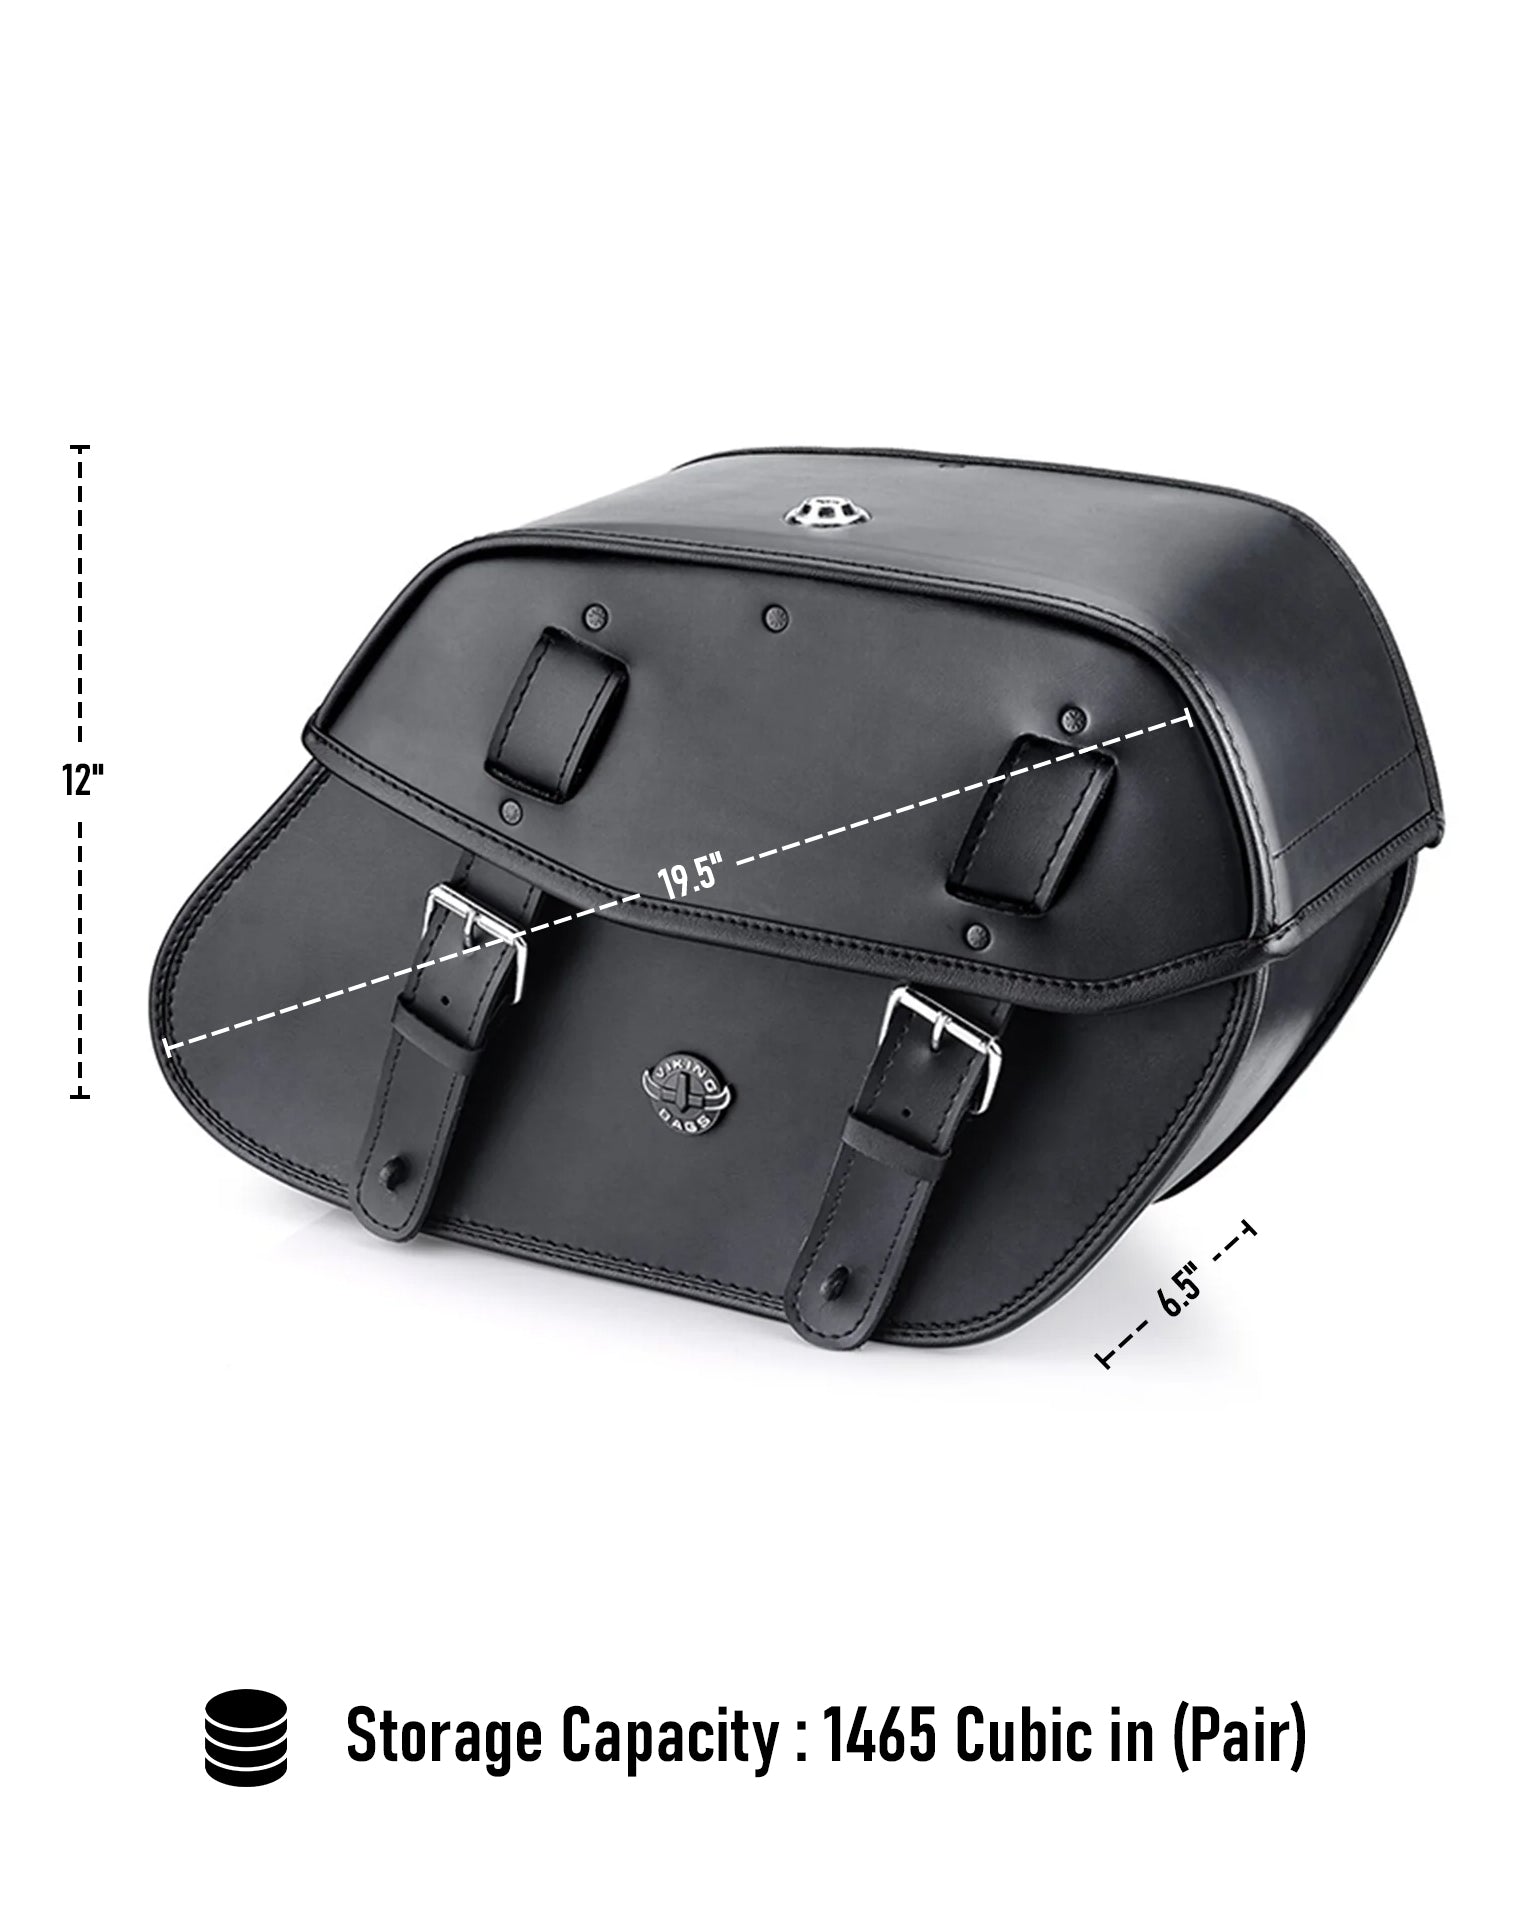 Viking Odin Large Suzuki Boulevard C50 Vl800 Leather Motorcycle Saddlebags Can Store Your Ridings Gears